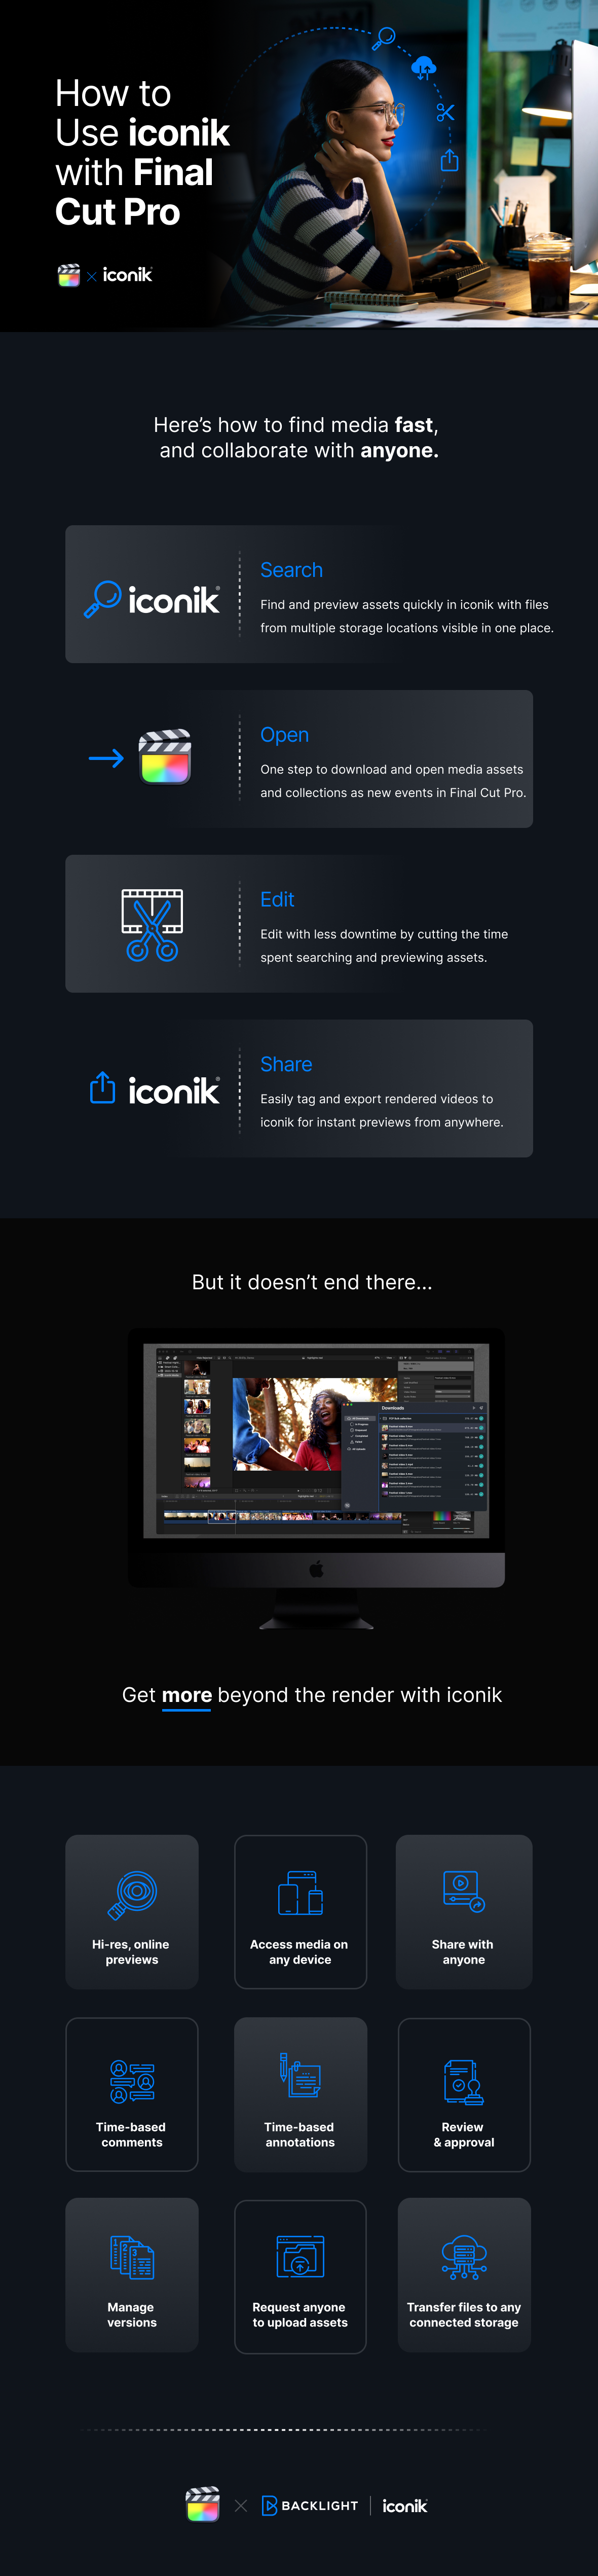 Infographic showing how to use the iconik and Final Cut Pro integration.